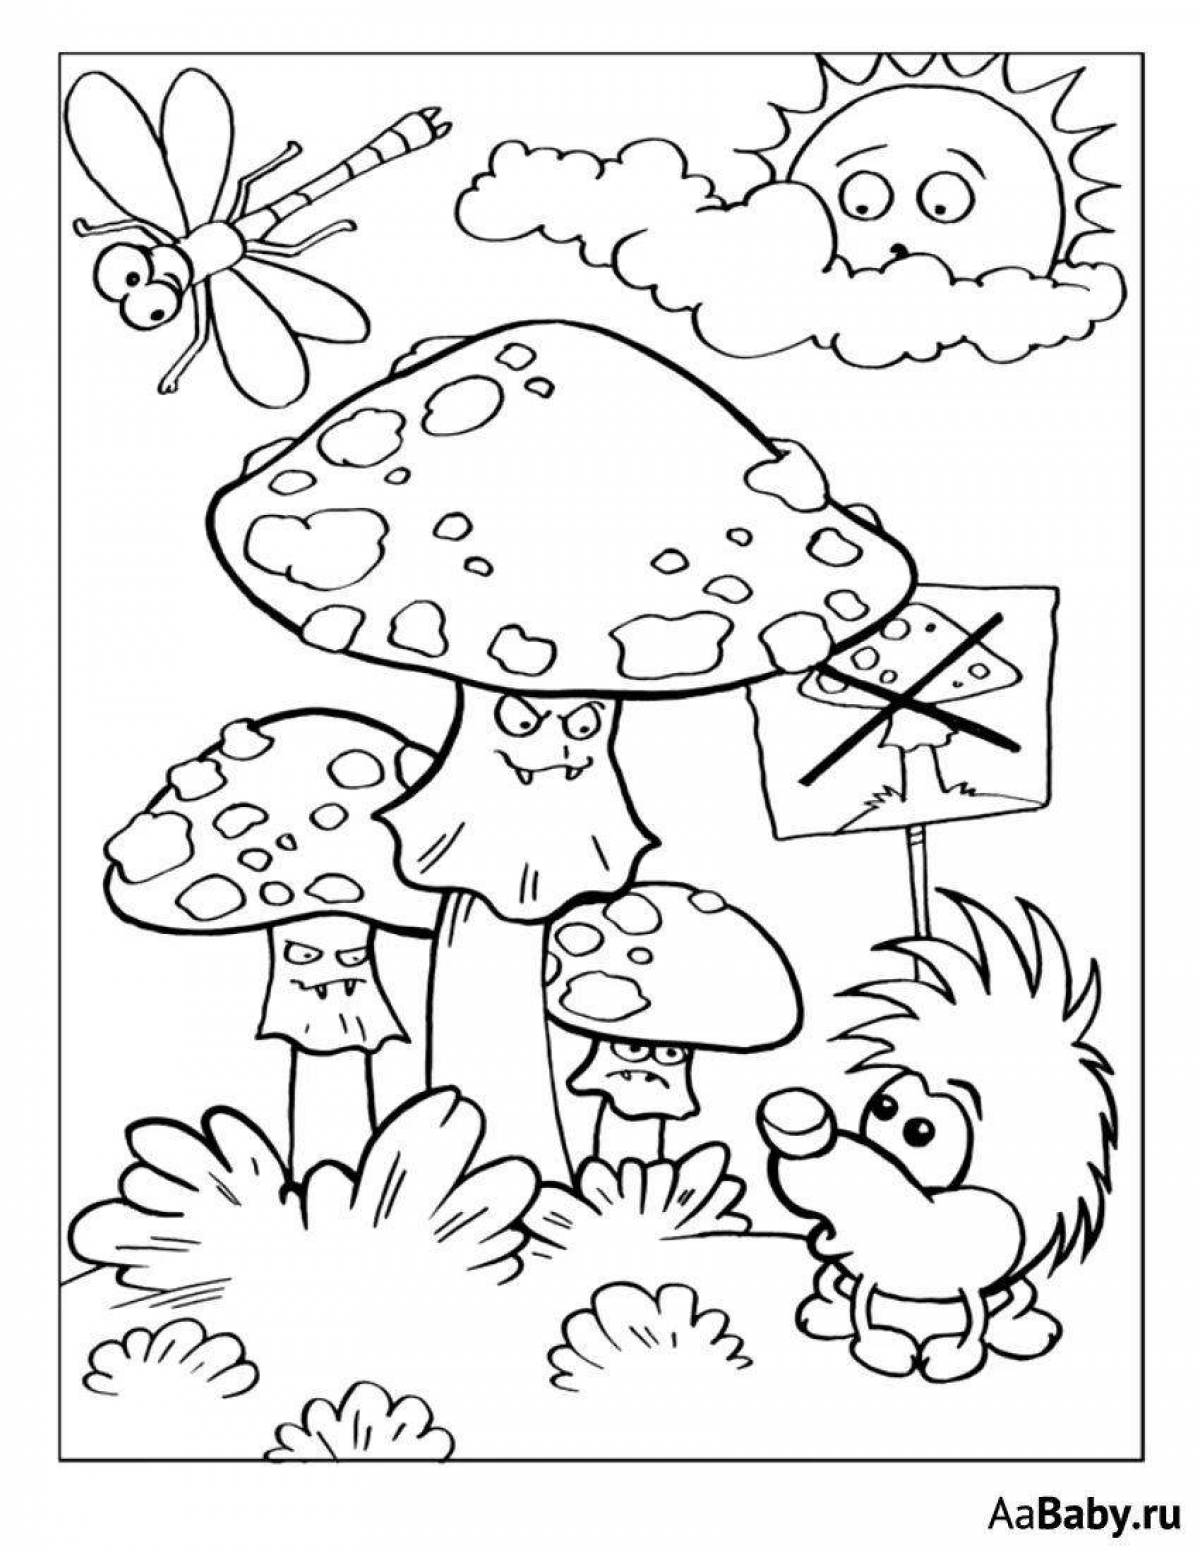 Fun drawing of fly agaric for kids